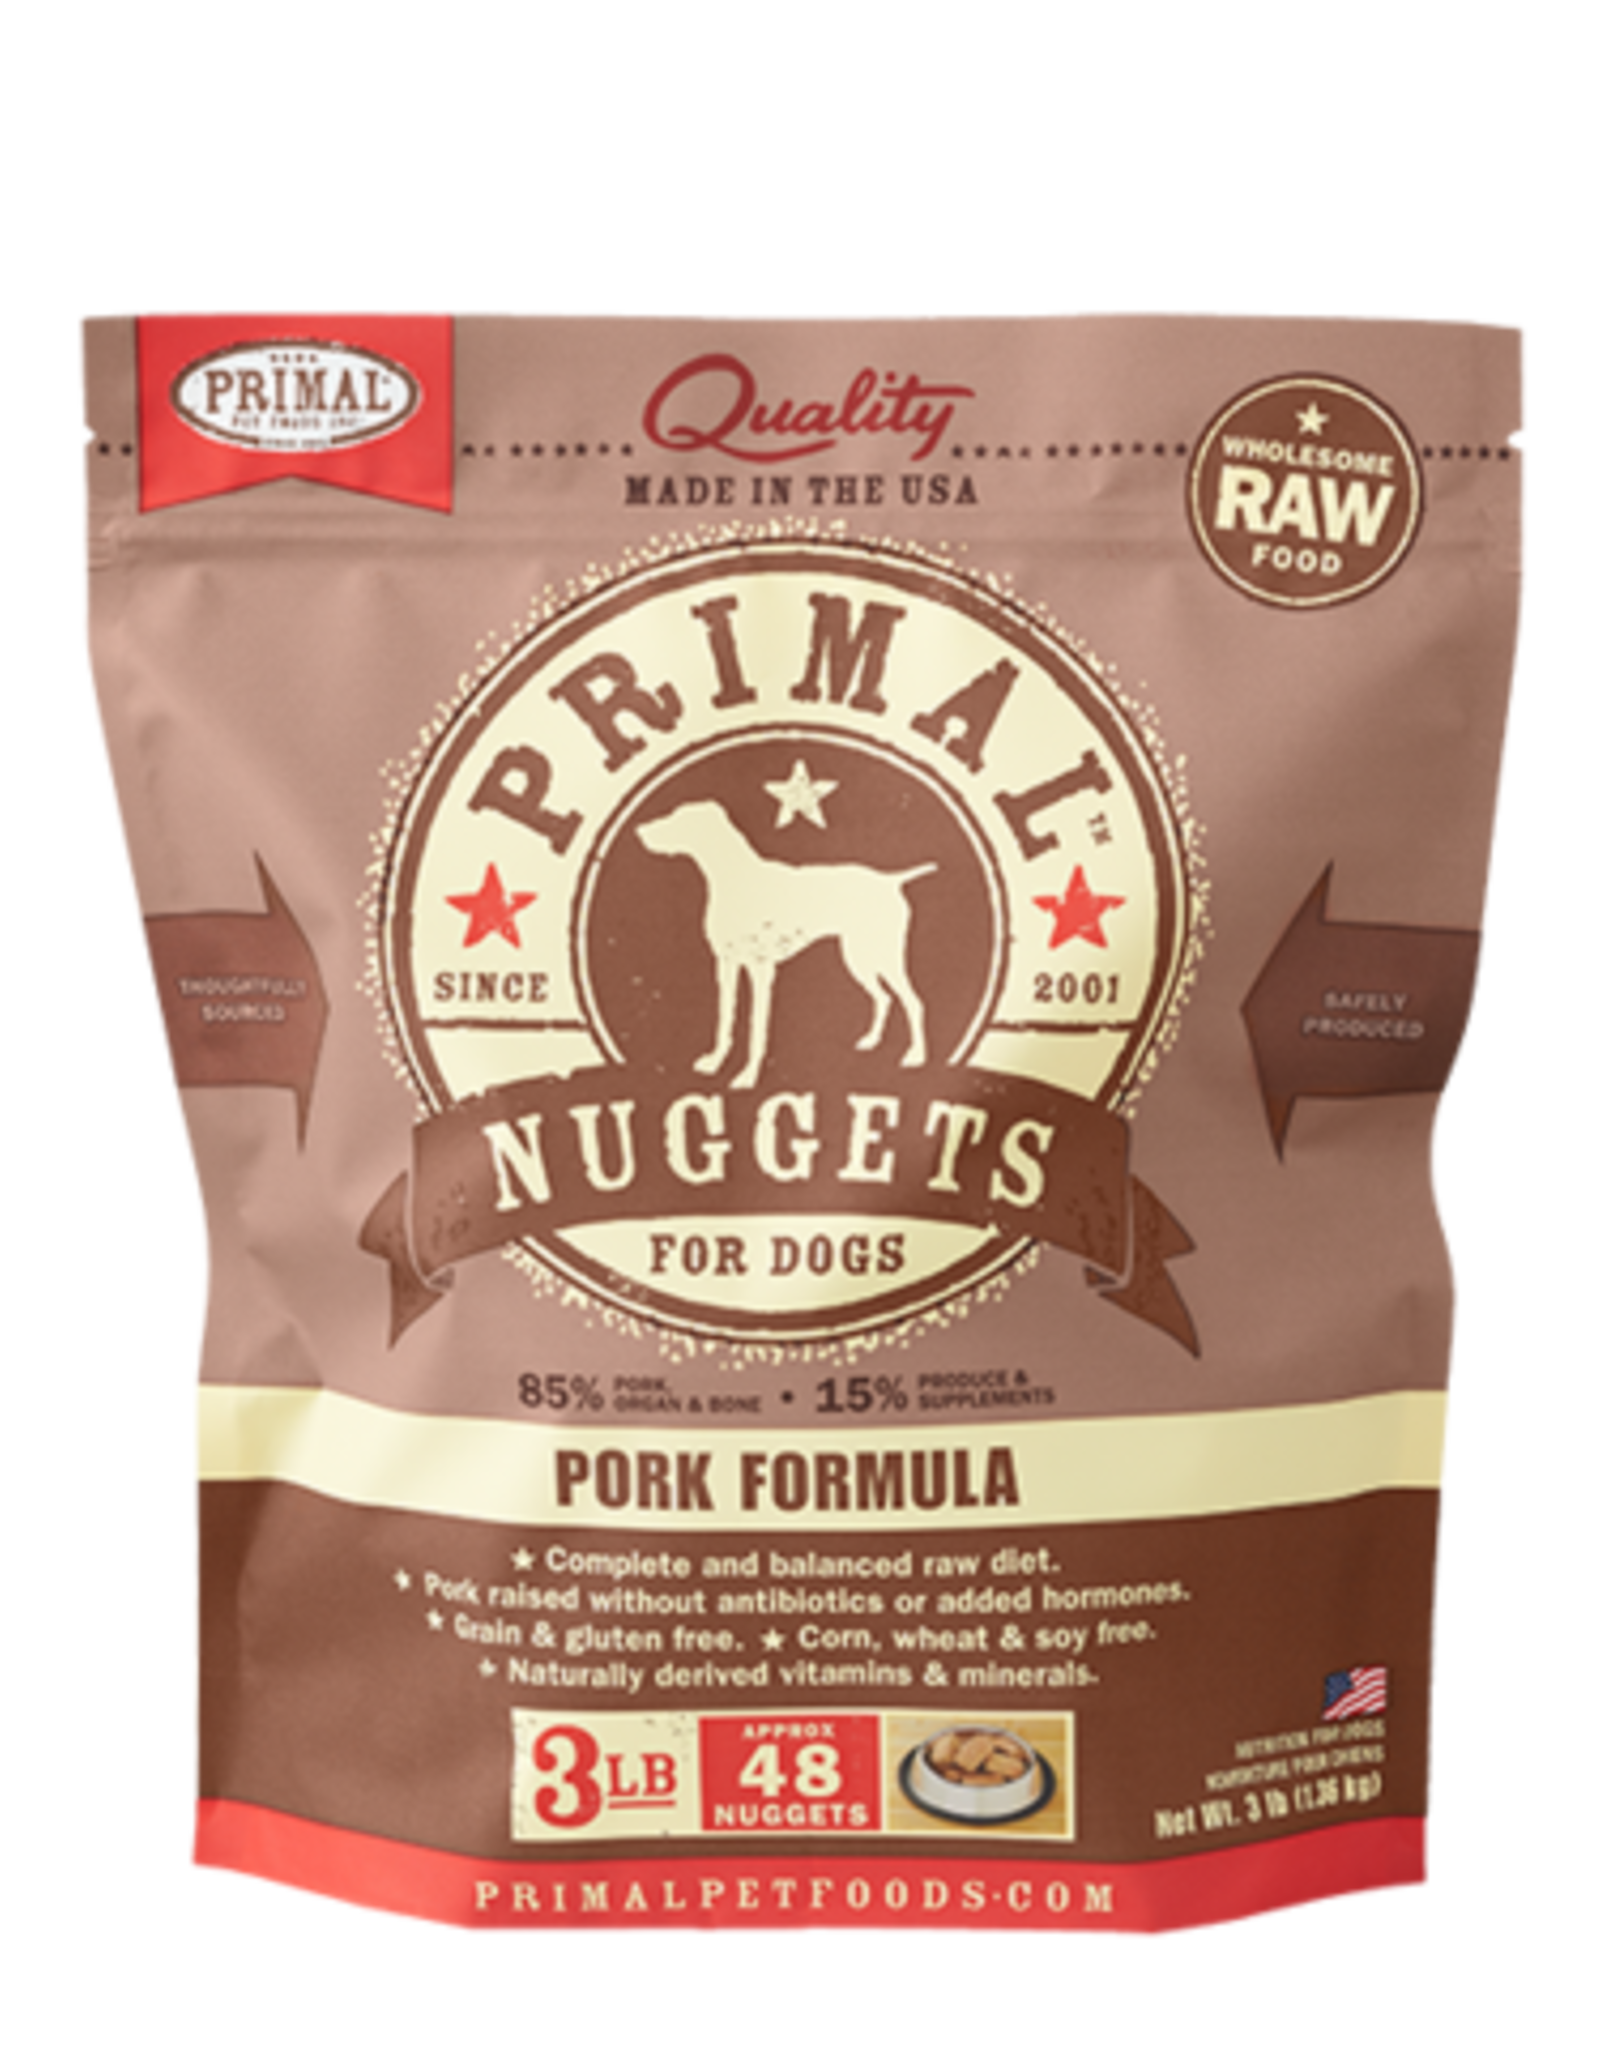 Primal Frozen Raw Dog 3lb Nuggets Pawtopia Your Pet's